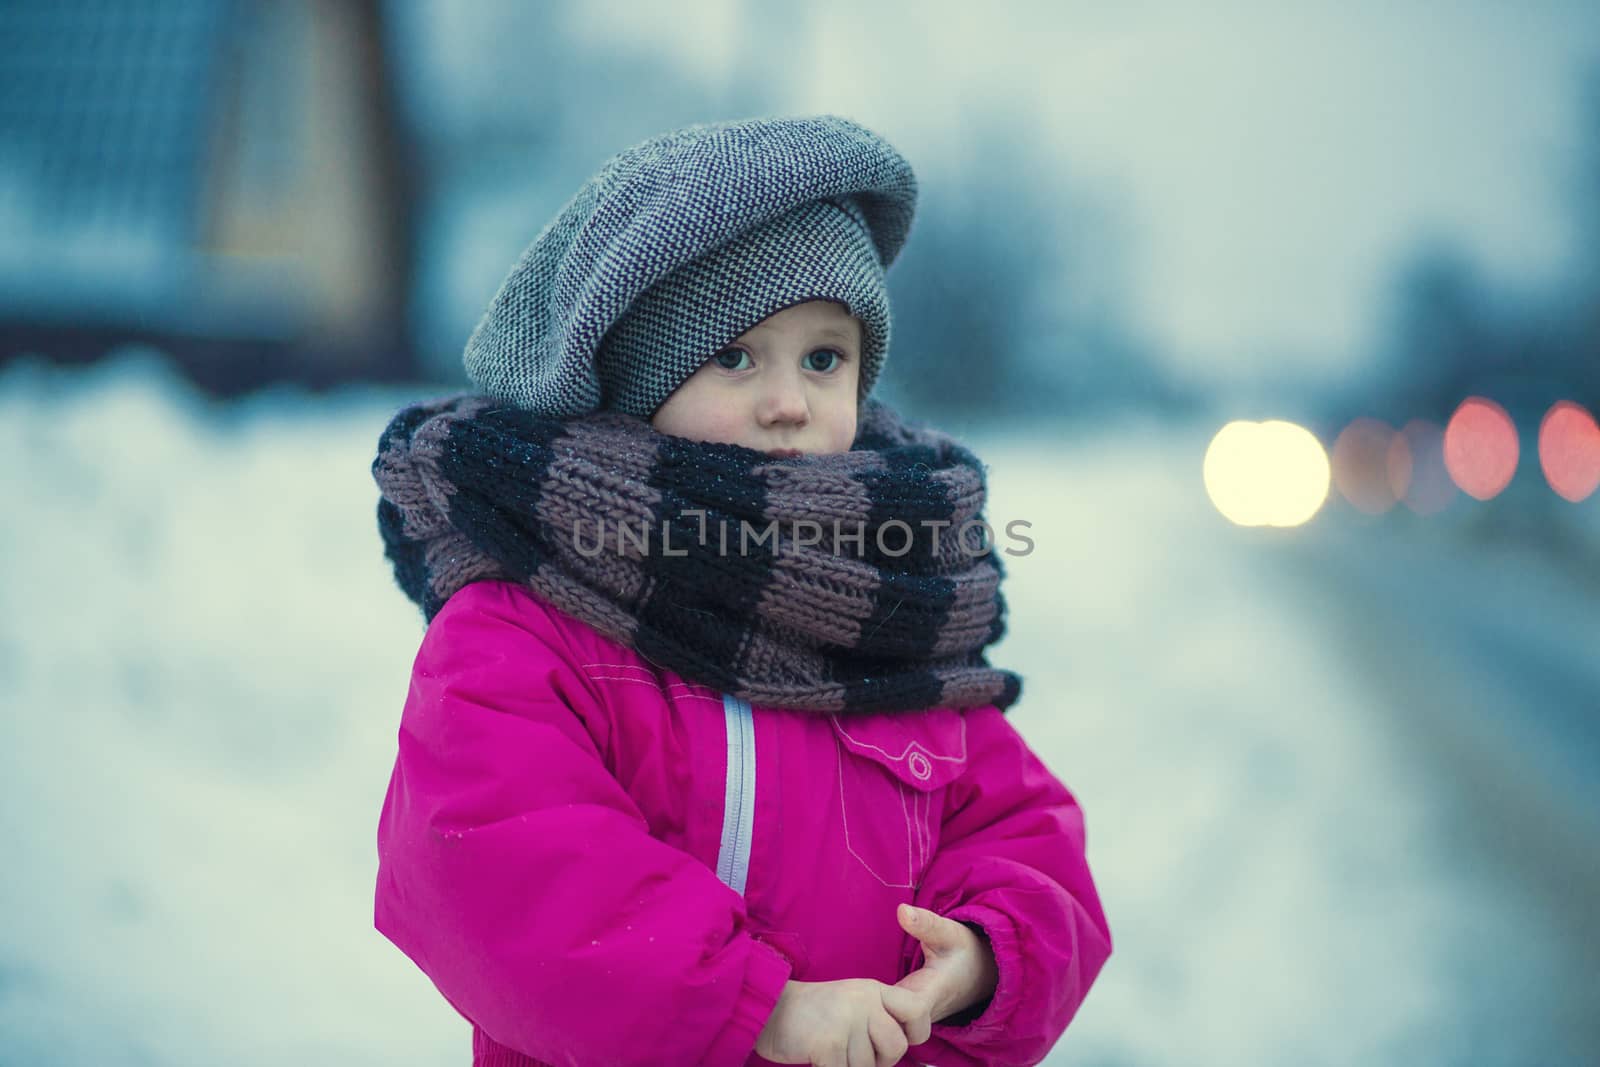 .A little girl stands in the snow by the road in the evening and watches passing cars while waiting for her dad to come home from work